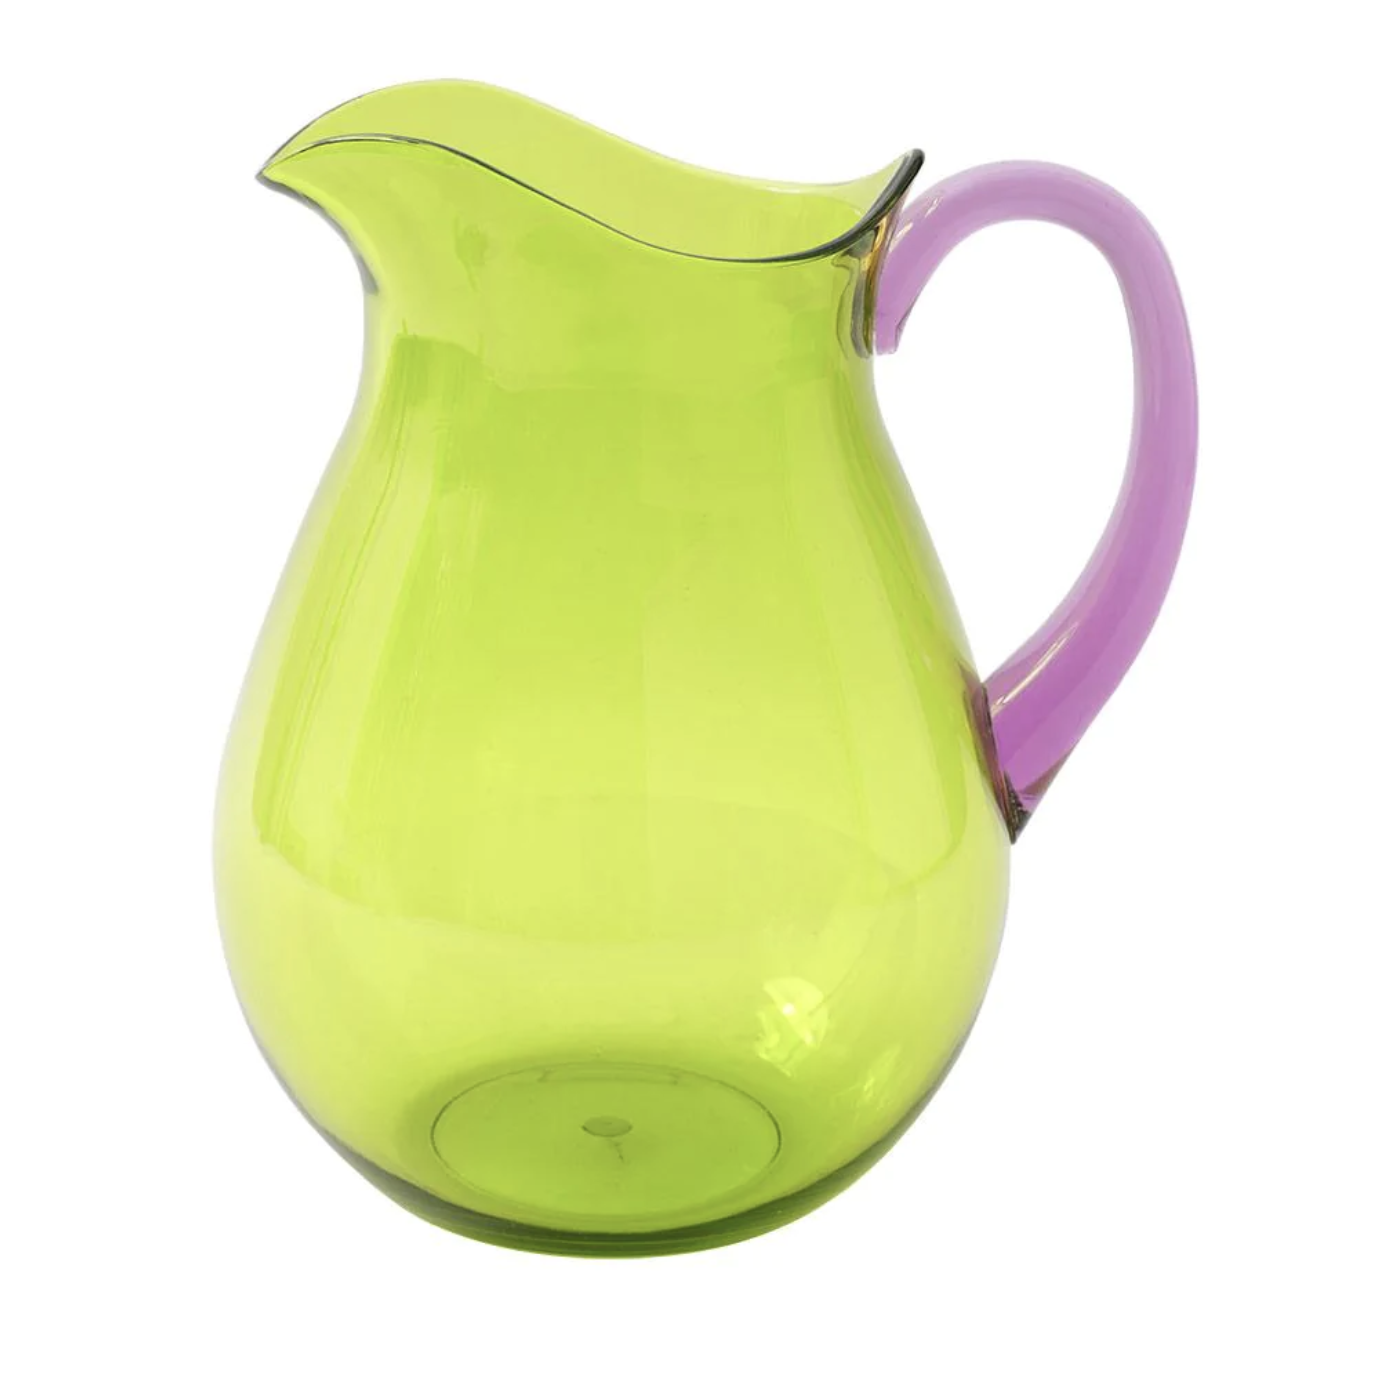 Acrylic Pitcher in Green with Amethyst Handle